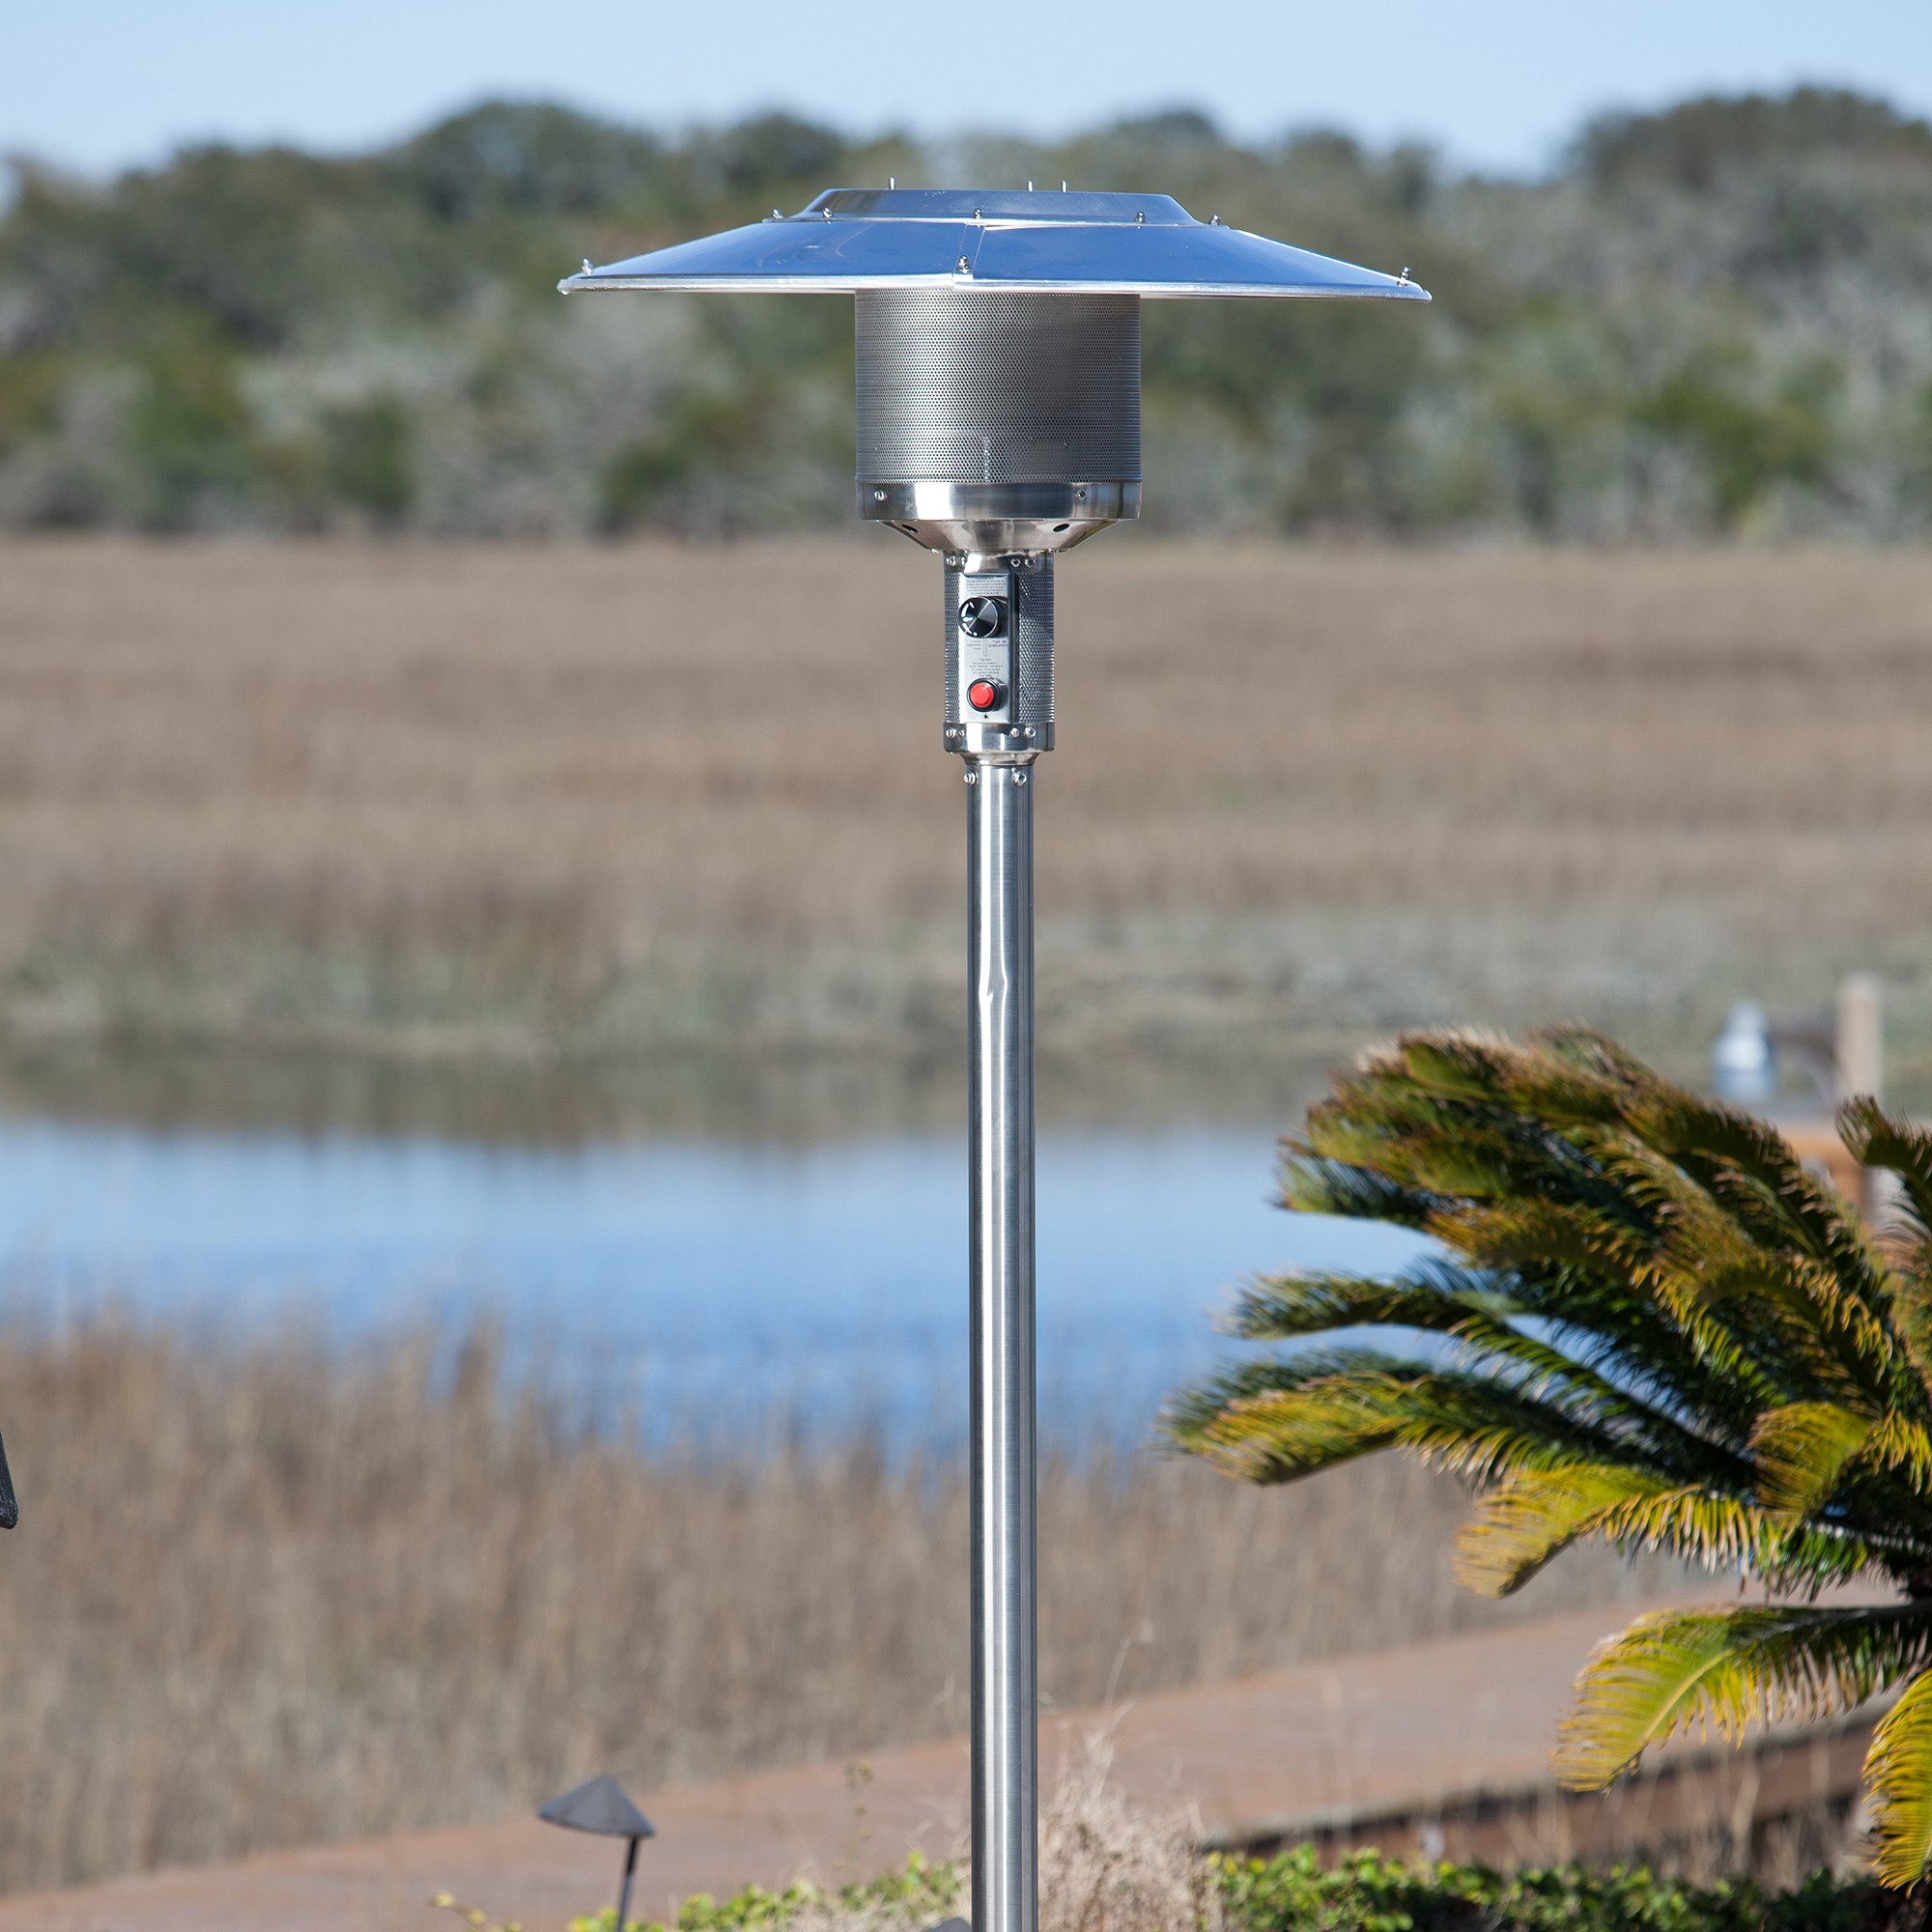 Stainless Steel Natural Gas Patio Heater